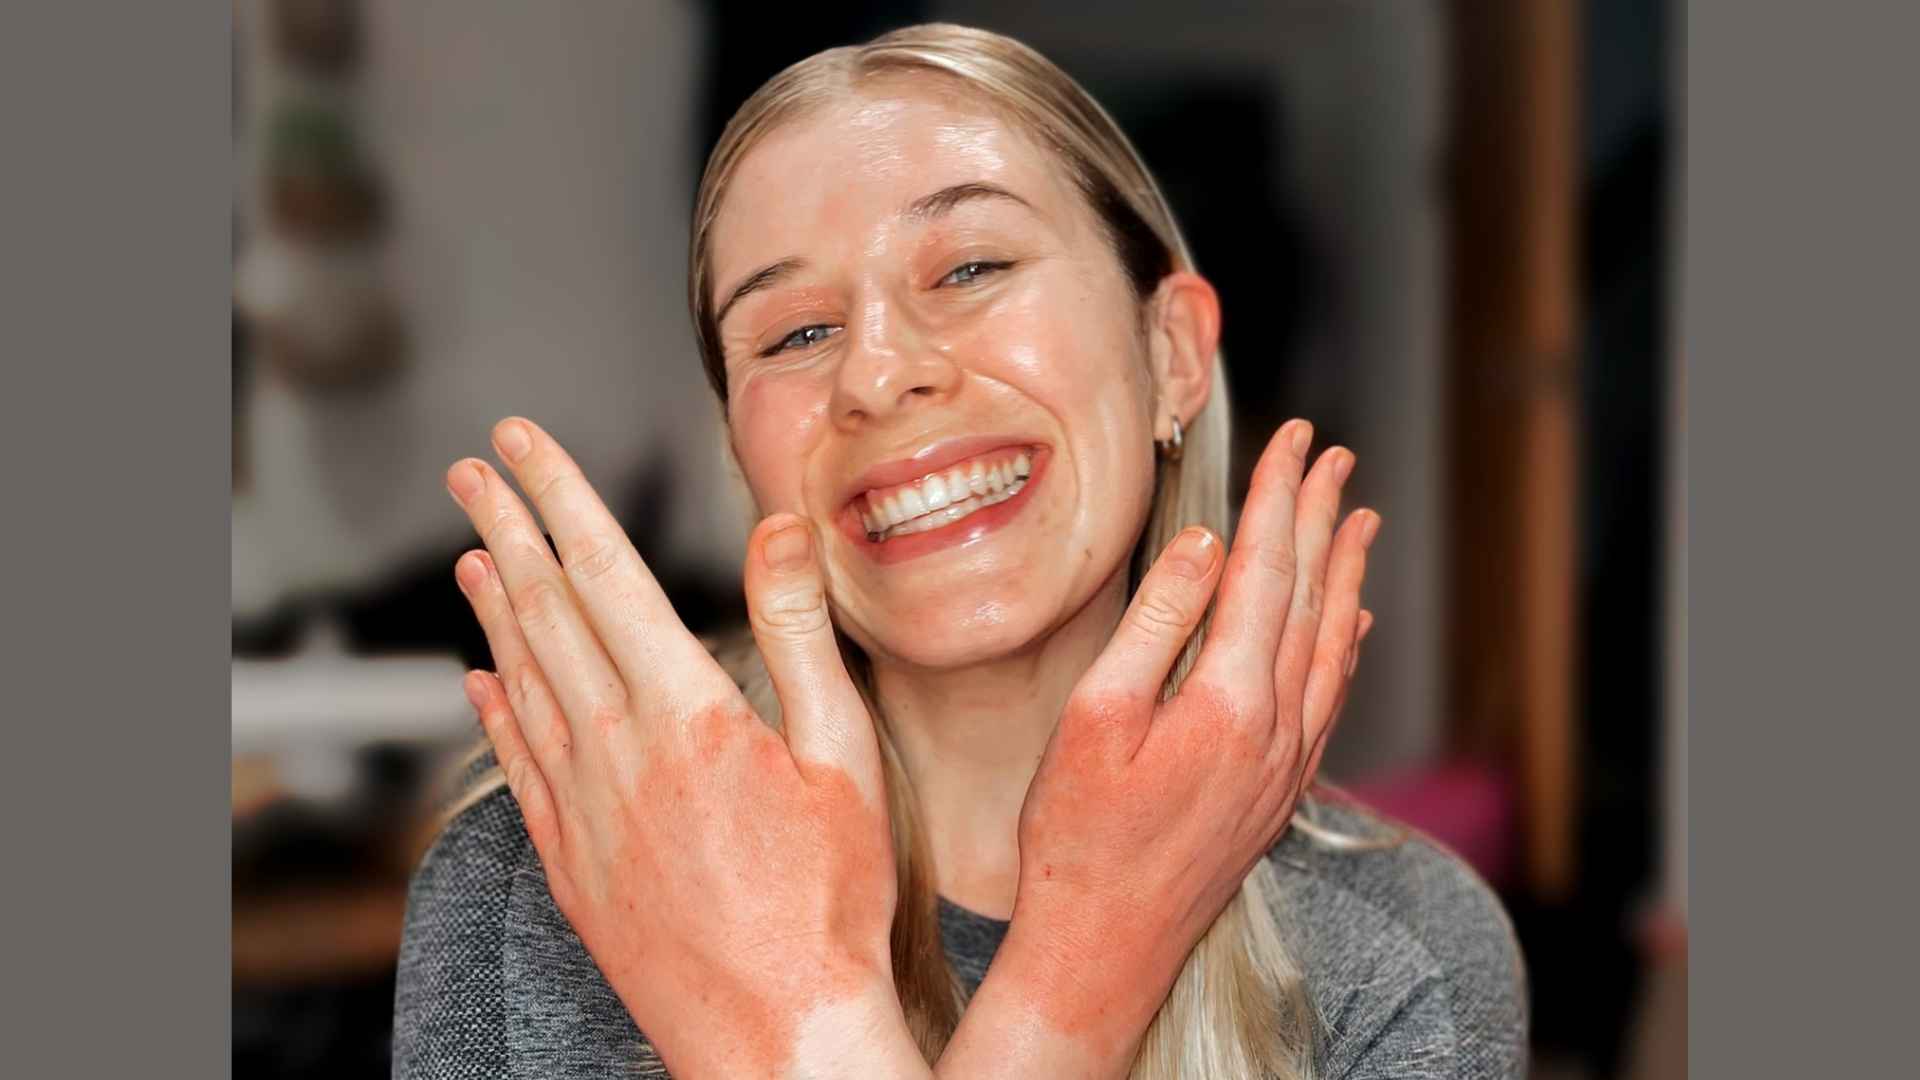 Katie is blonde and in her early twenties. She's smiling at the camera holding up the backs of her hands near her face to show an eczema flare-up